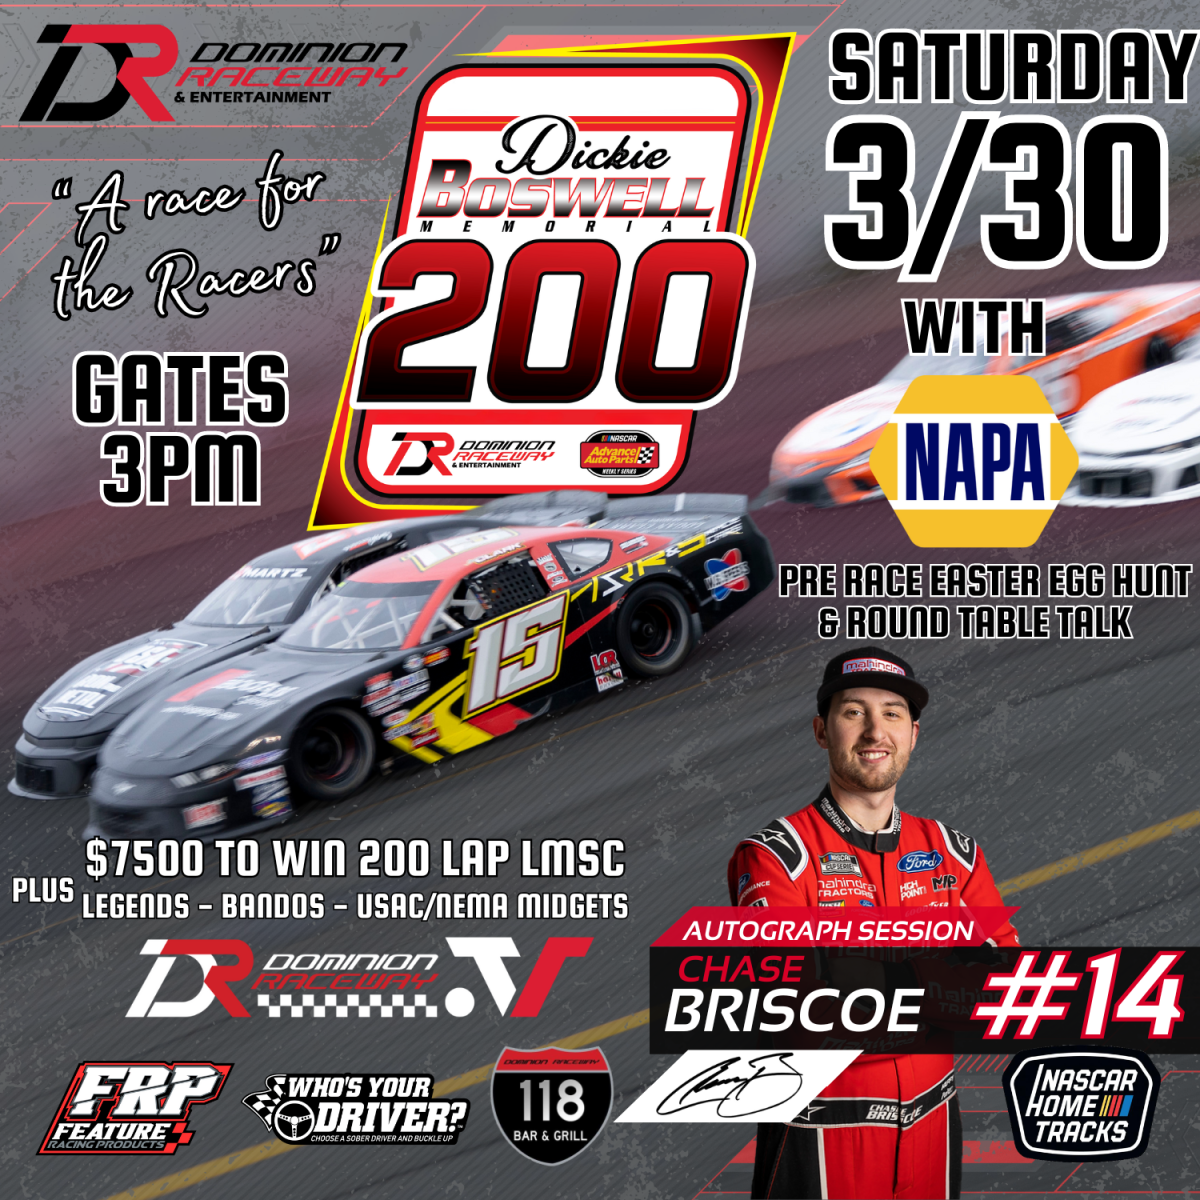 2nd Annual Dickie Boswell Memorial 200